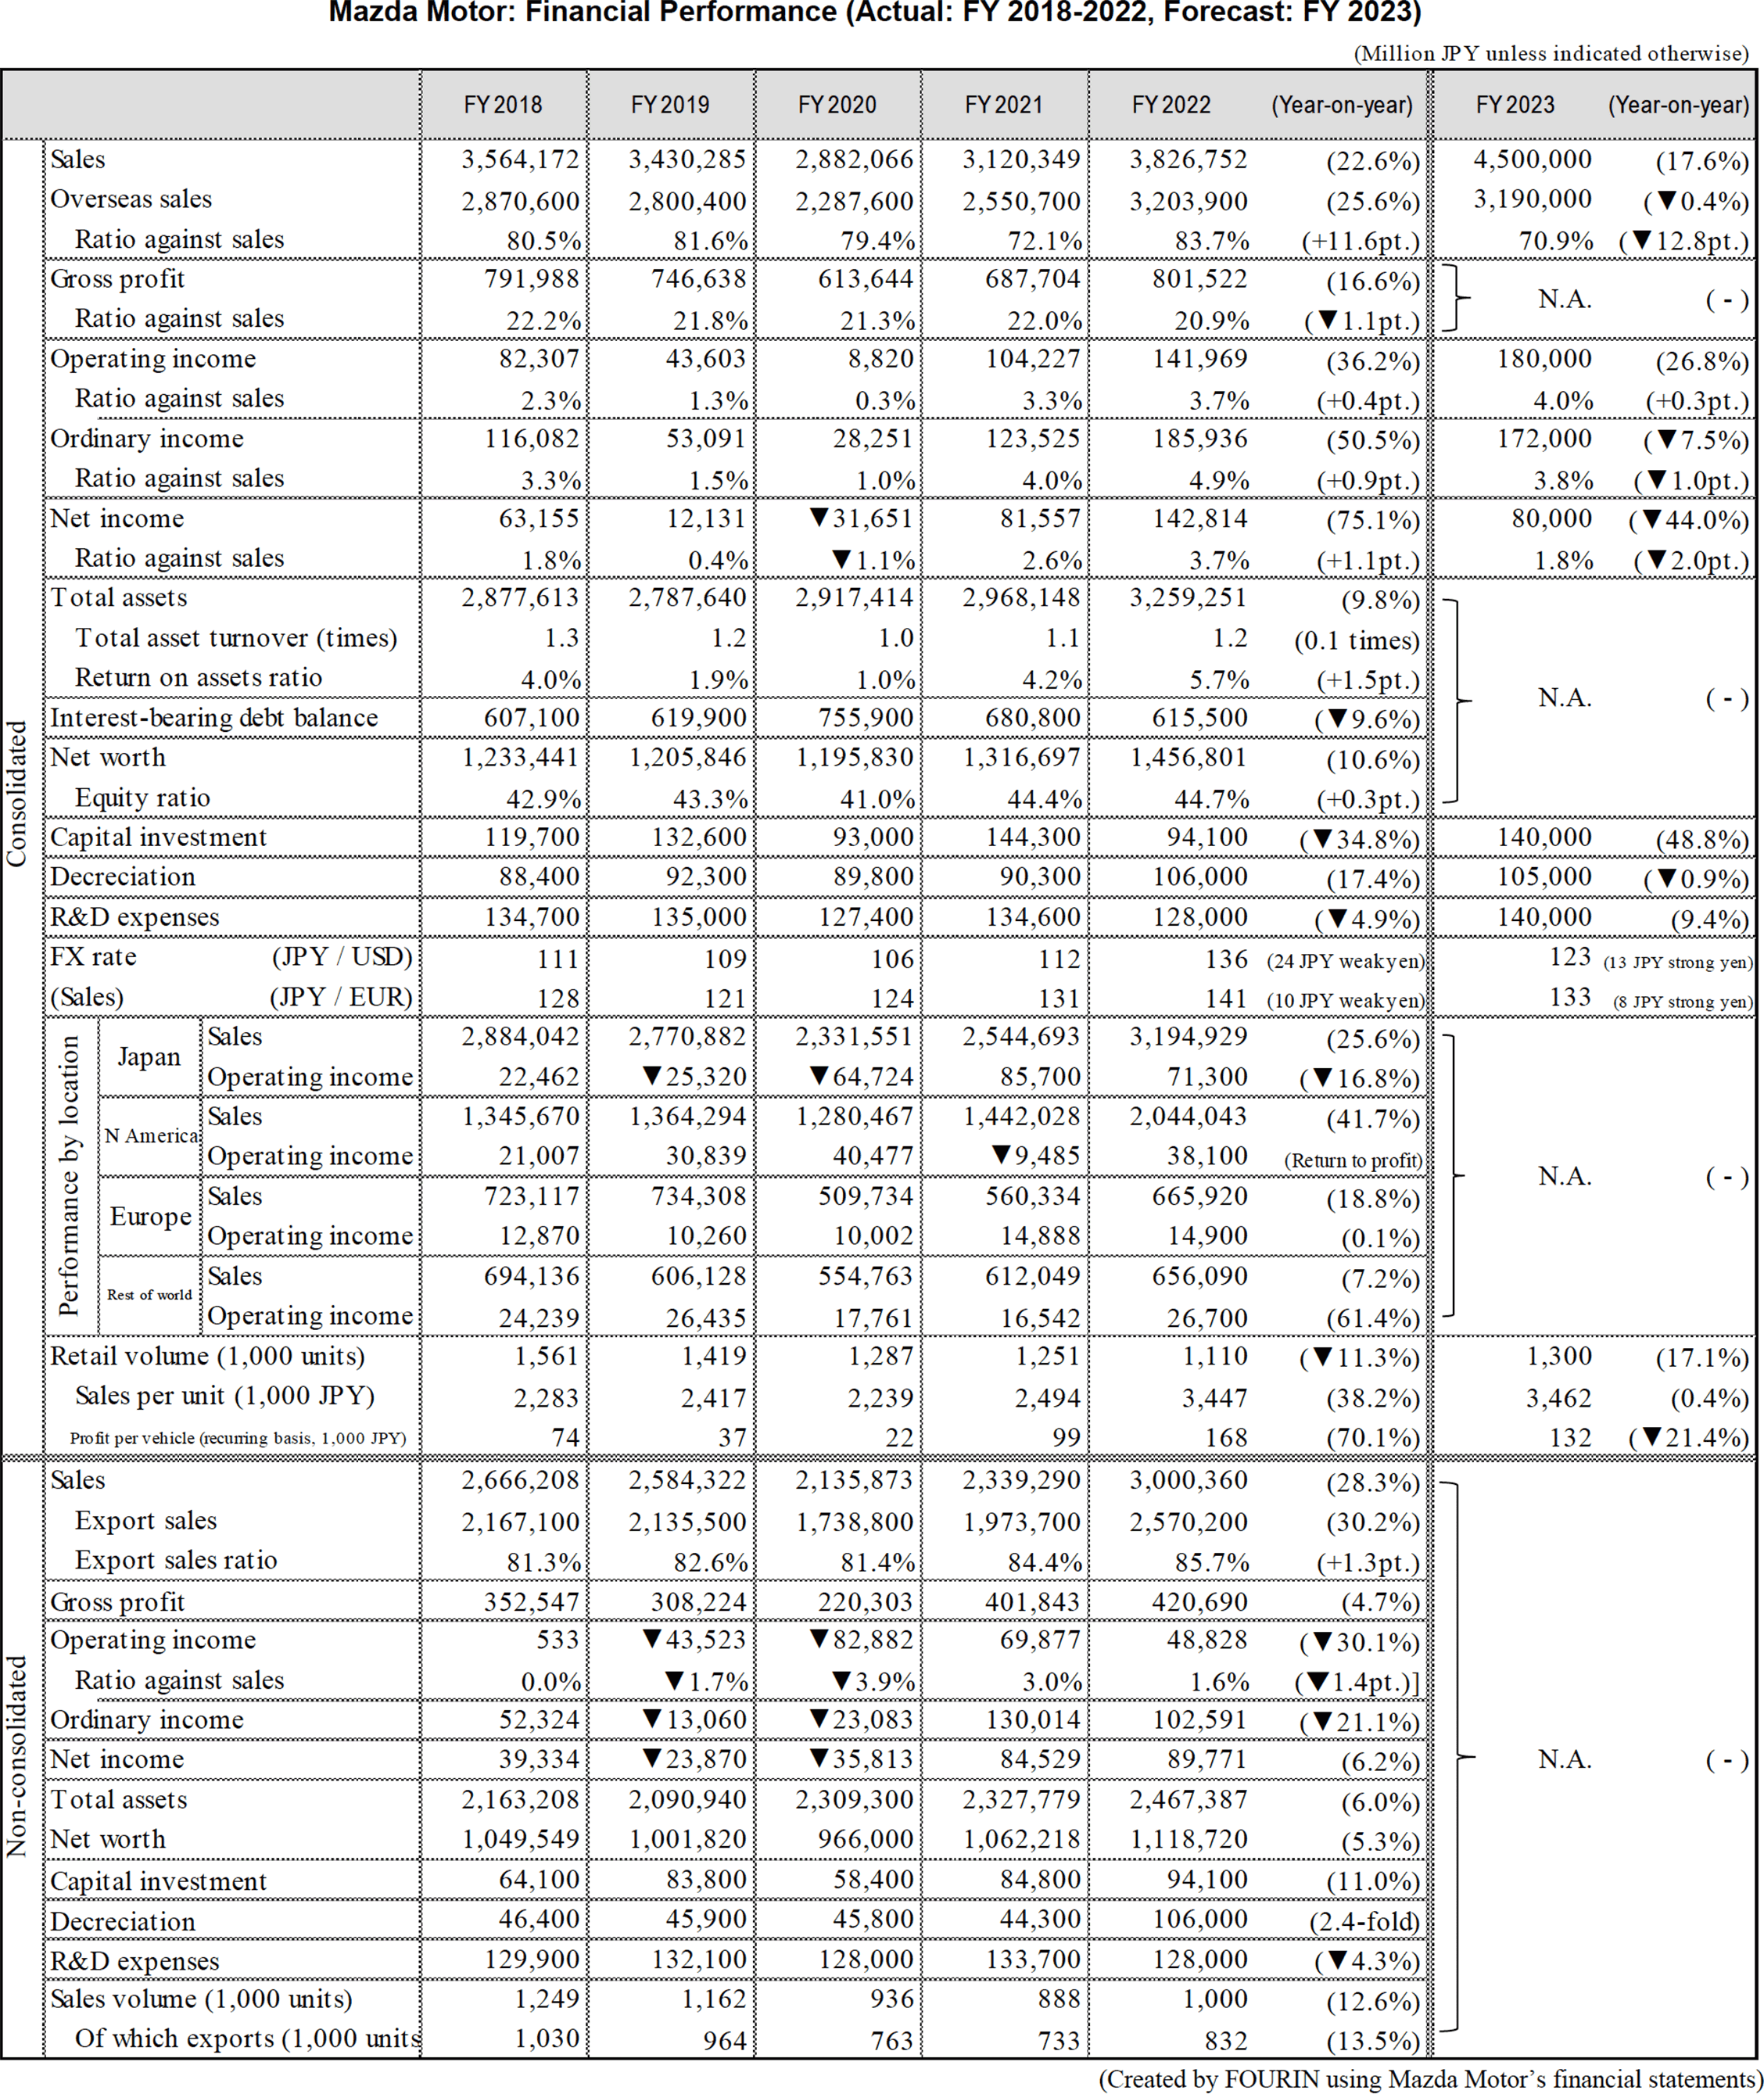 Table data: China: Mazda Motor: Financial Performance (Actual: FY 2018-2022, Forecast: FY 2023)